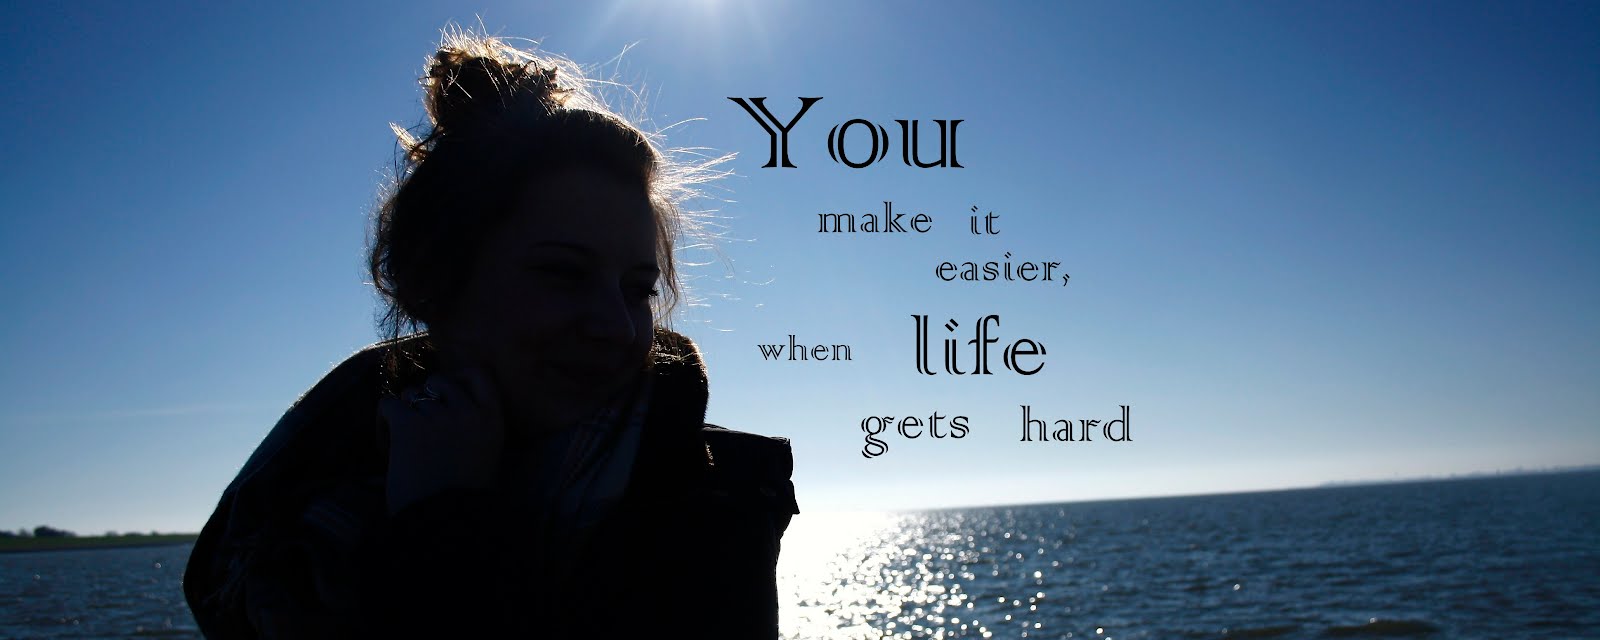 you make it easier when life gets hard